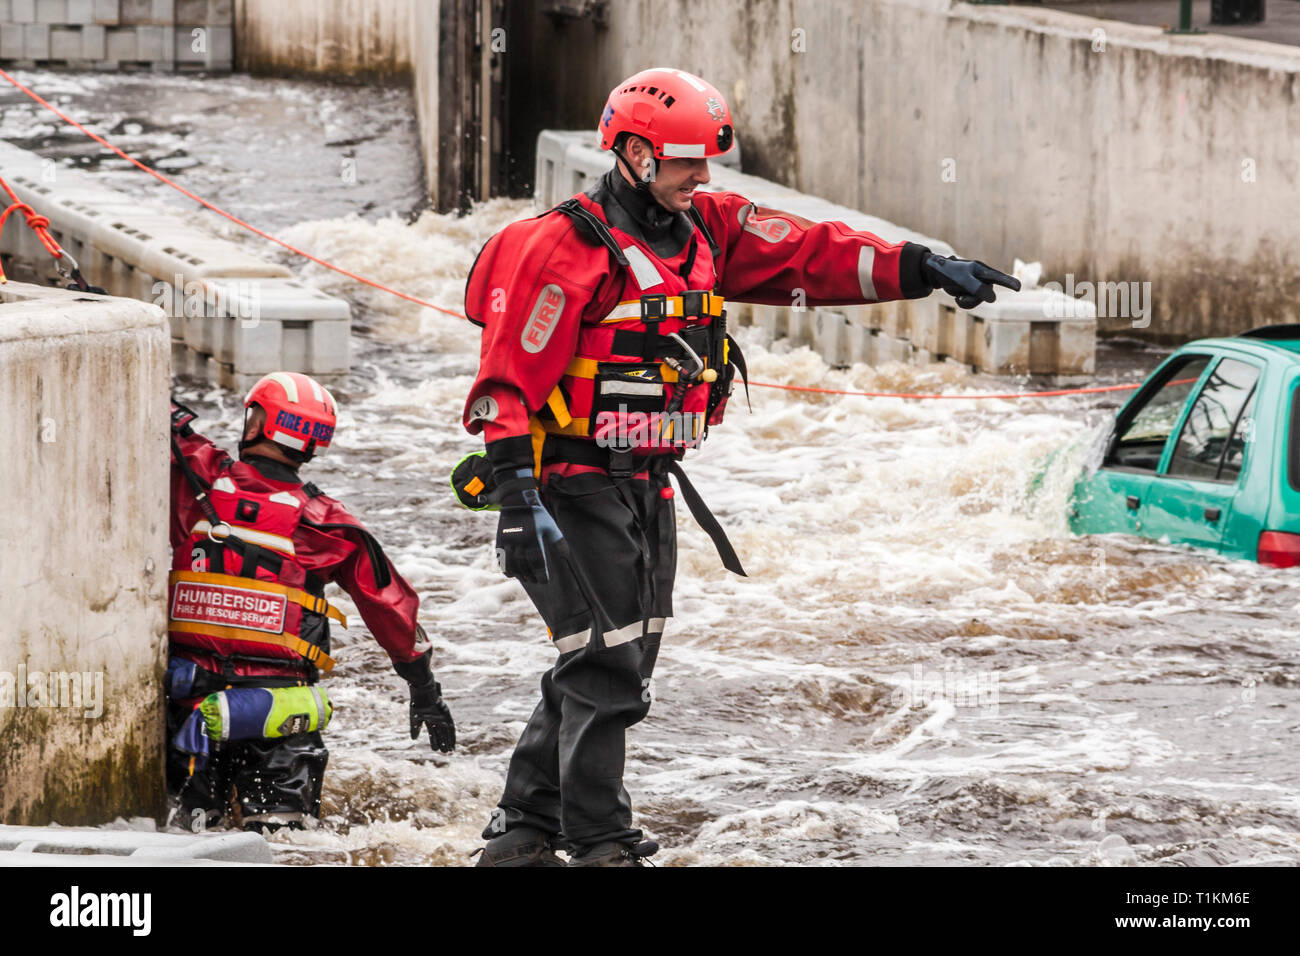 Humberside Fire and Rescue Service doing a river rescue training exercise at the Tees Barrage,Stockton-on-Tees,England,UK Stock Photo